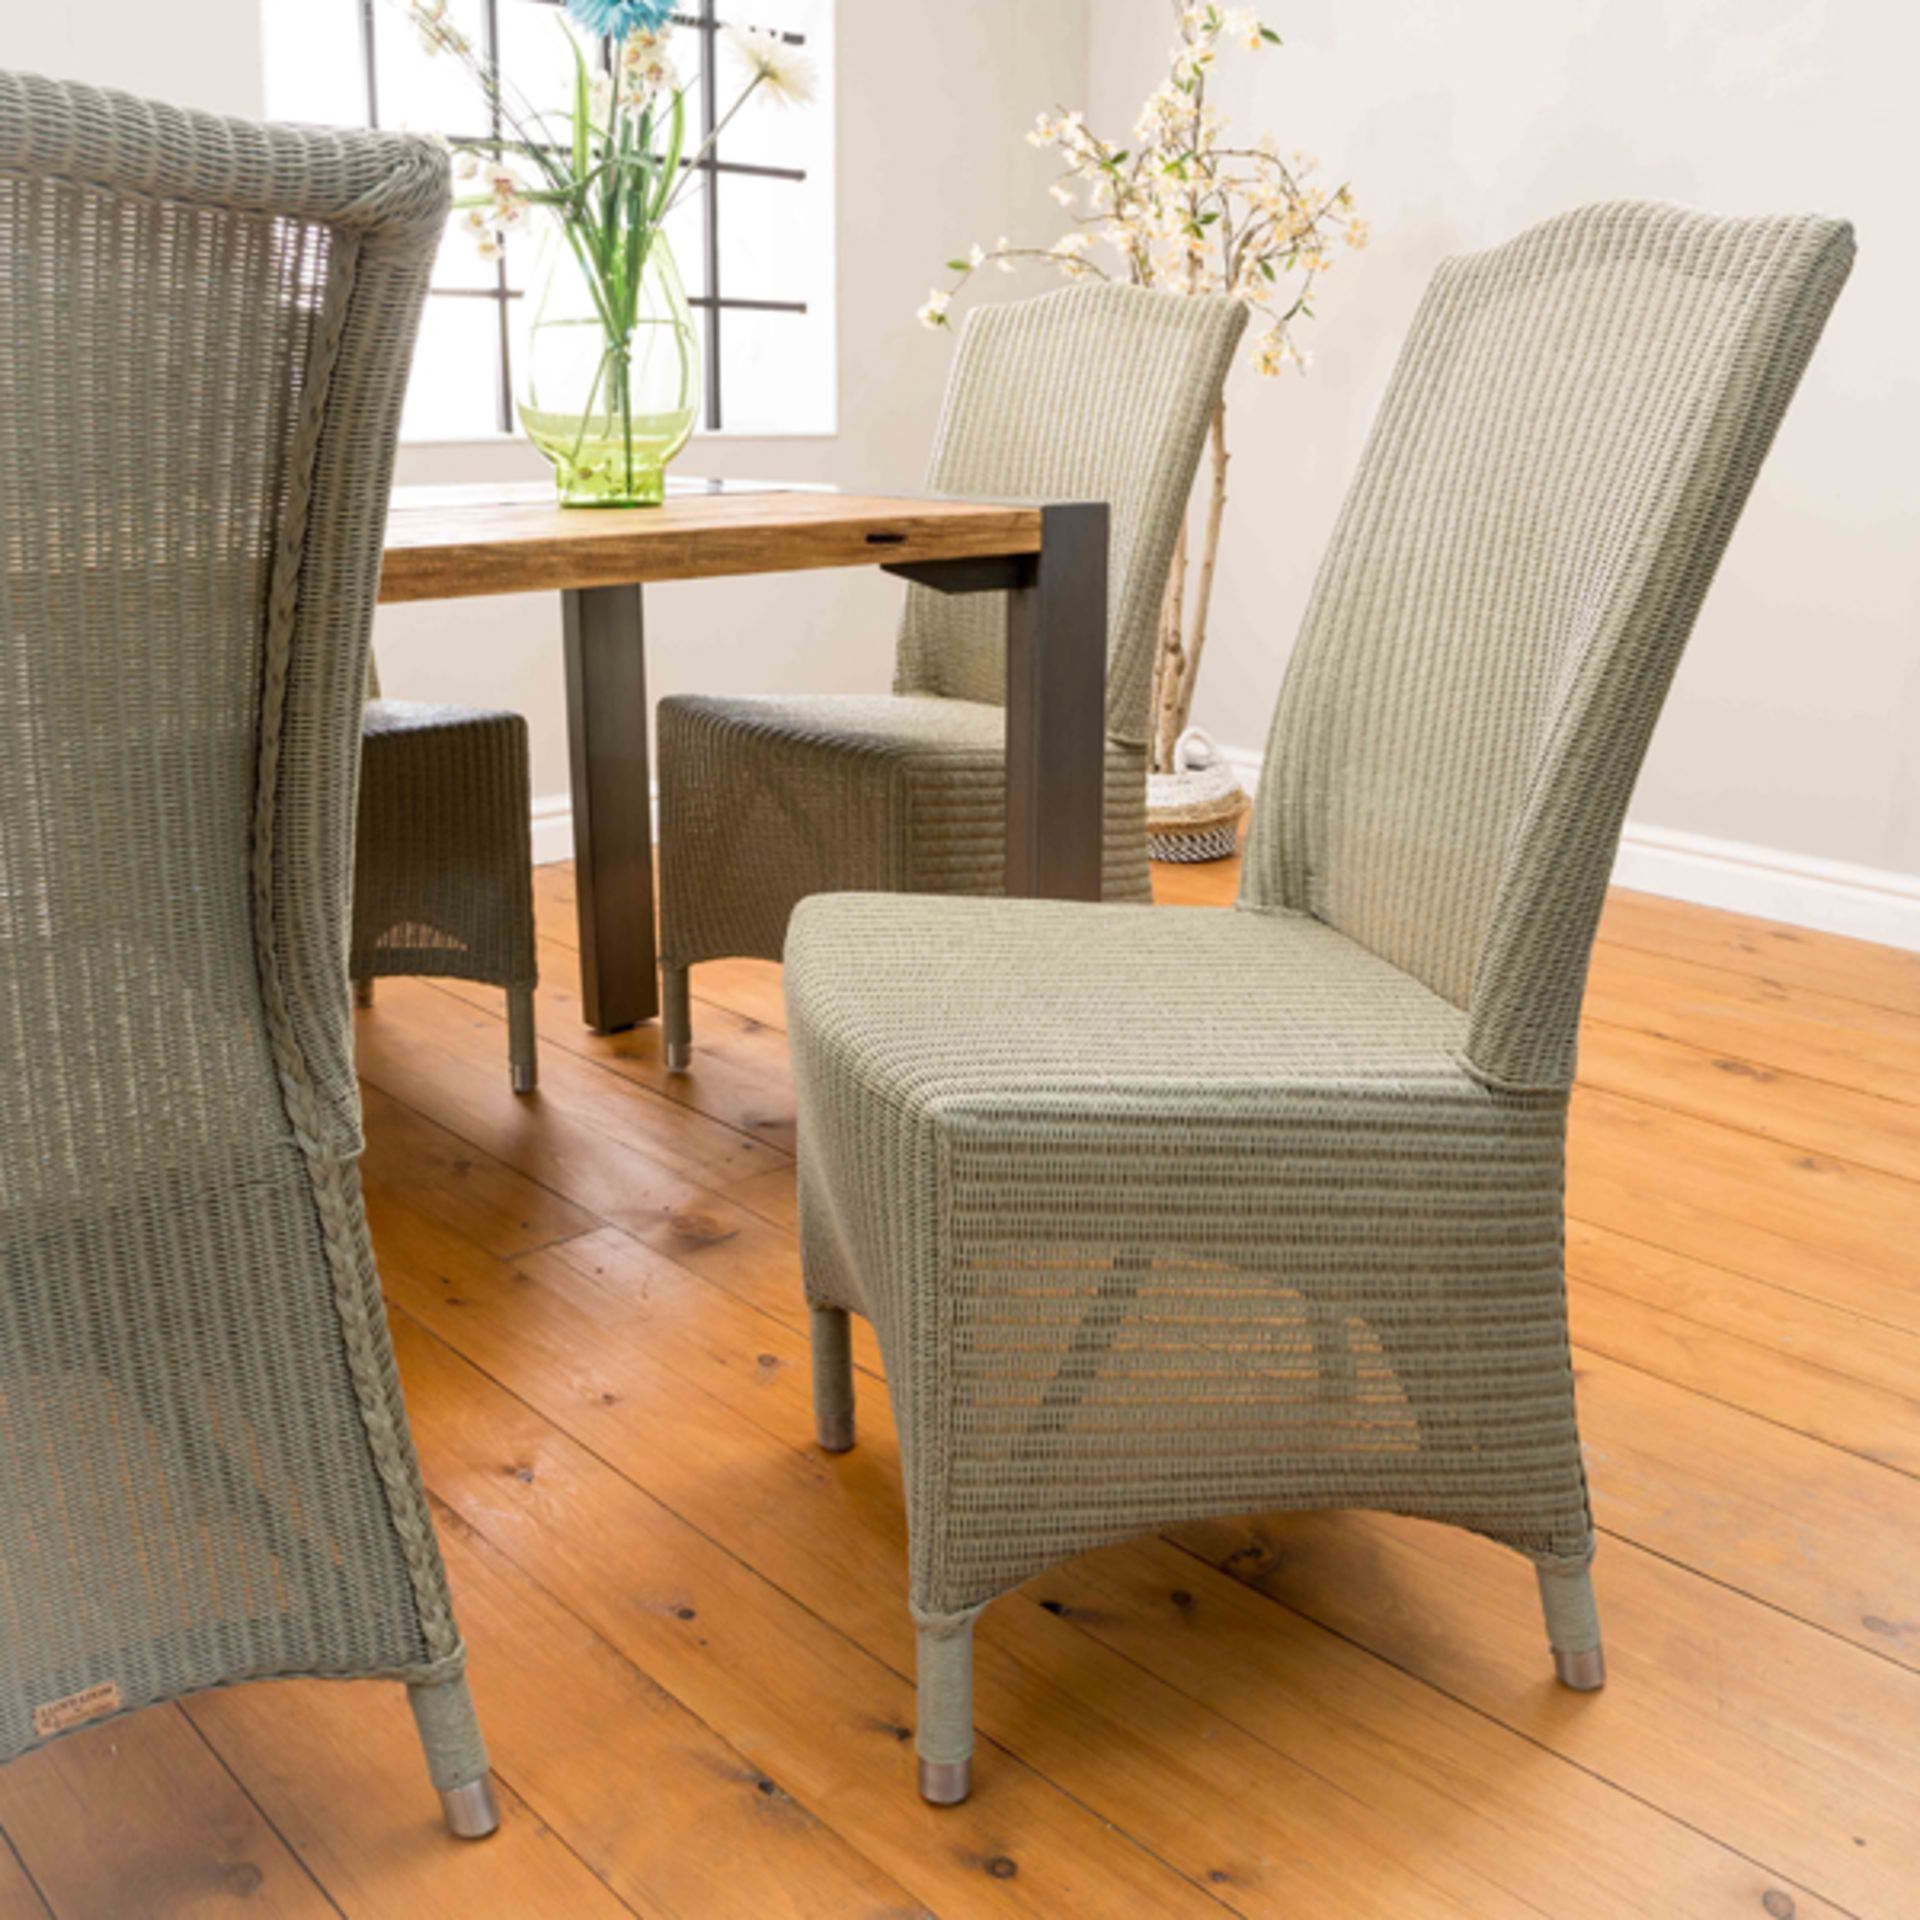 A Pair Of Lloyd Loom Chairs - Image 2 of 2